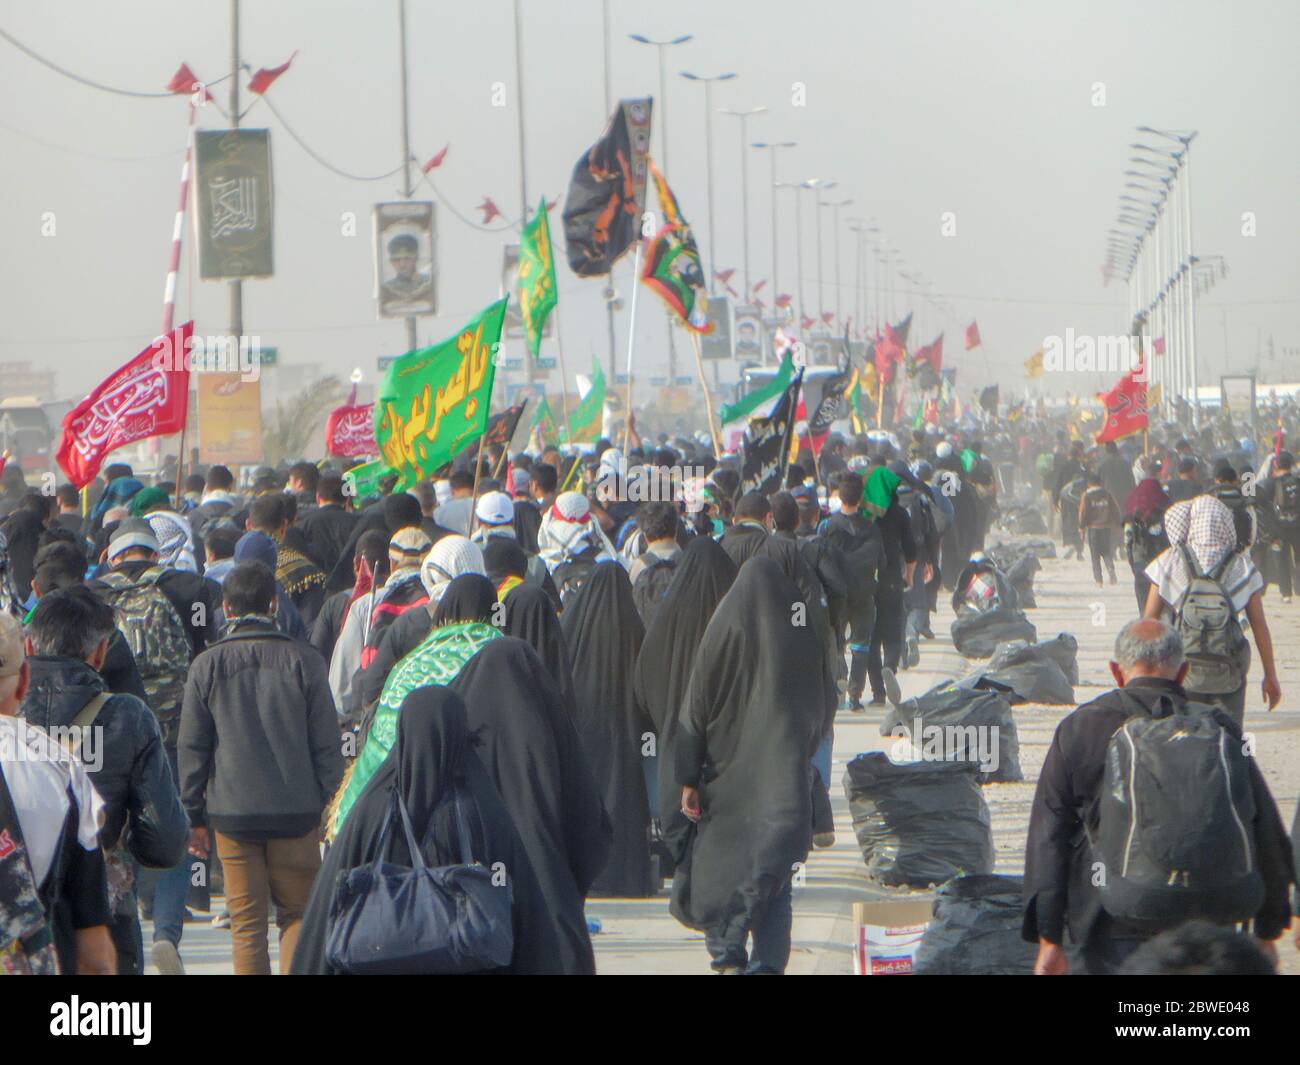 Karbala, Bagdad, Iraq, 06 09 2019:  Millions of Shia marching across the world to Karbala for arbaeen .  A great global gathering in Iraq. Stock Photo